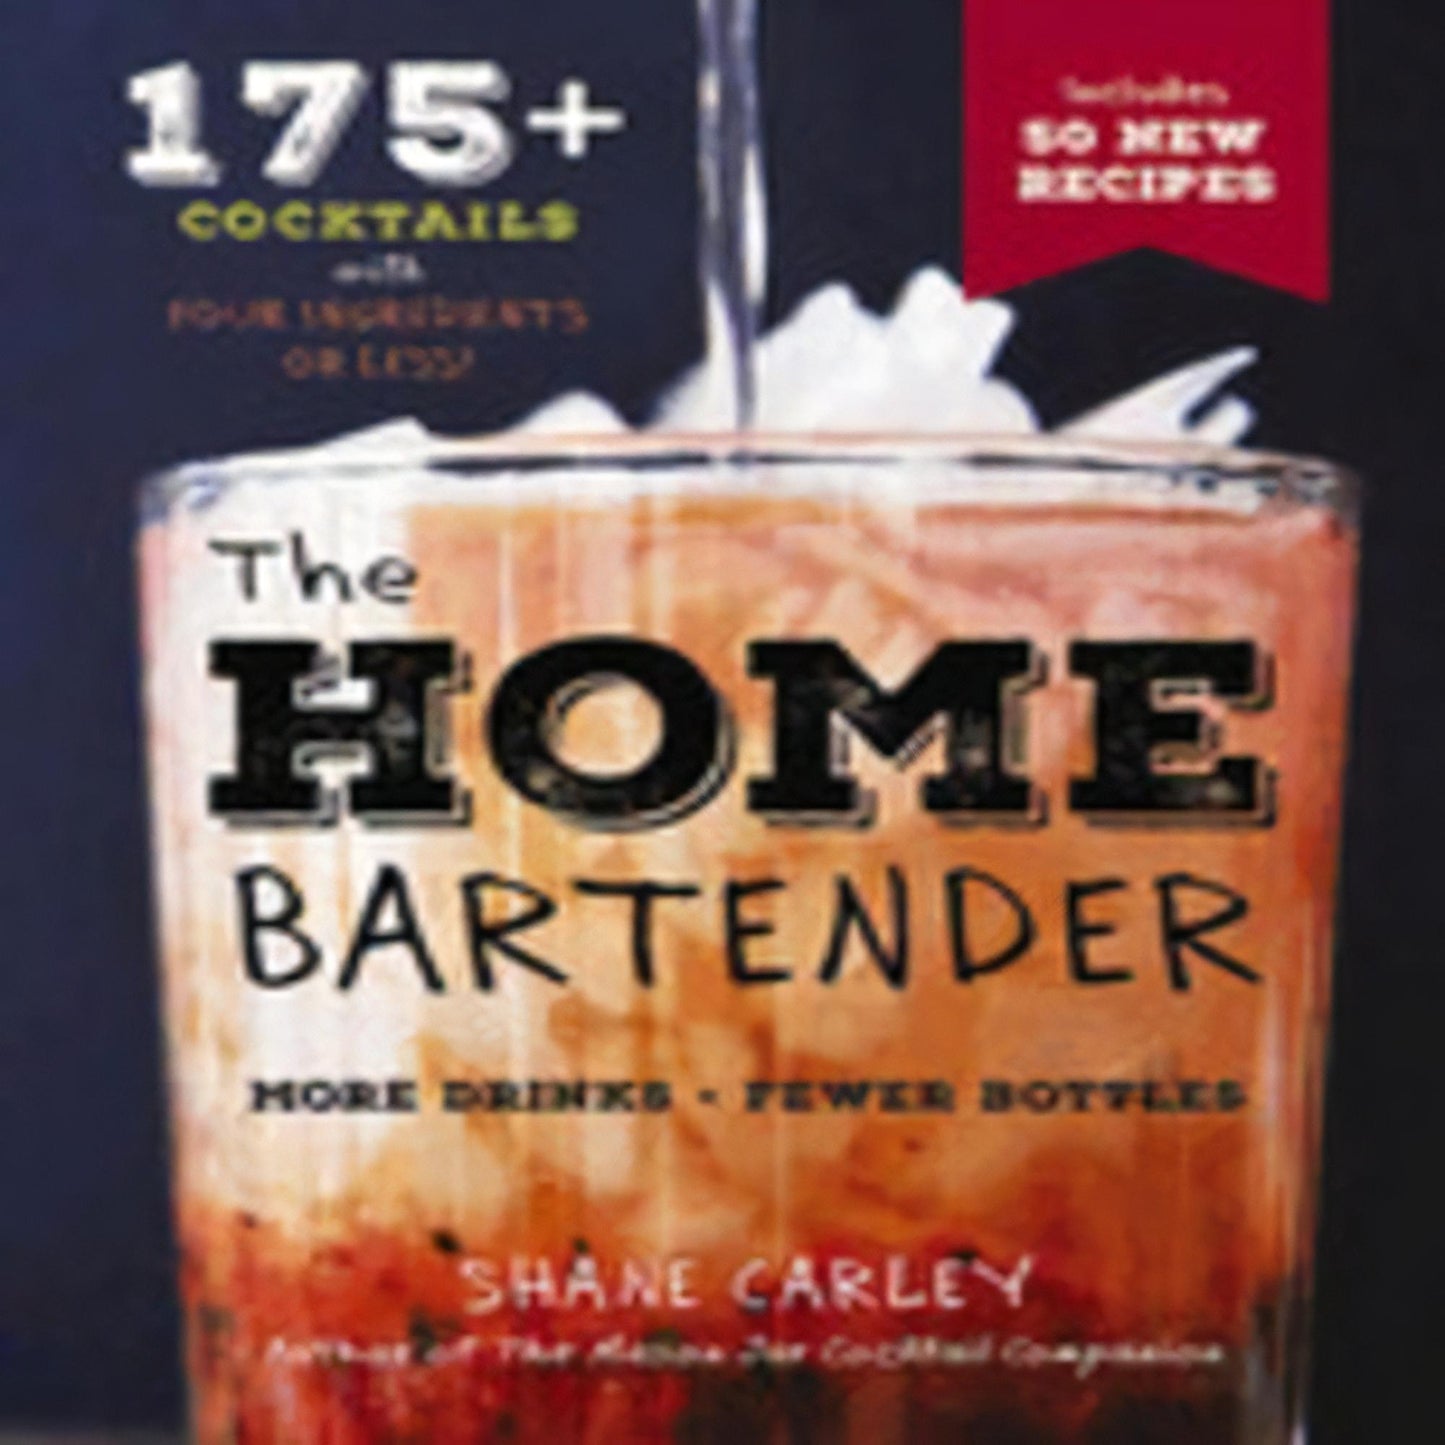 TEXTBOOK The Home Bartender, Second Edition: 175+ Cocktails Made with 4 Ingredients or Less (Cocktail Book, Easy Simple Recipes, Mixology, Bartending Tricks and Re (Art of Entertaining)763-051023-9781604338126DPGBOOKSTORE.COM. Today's Bestsellers.